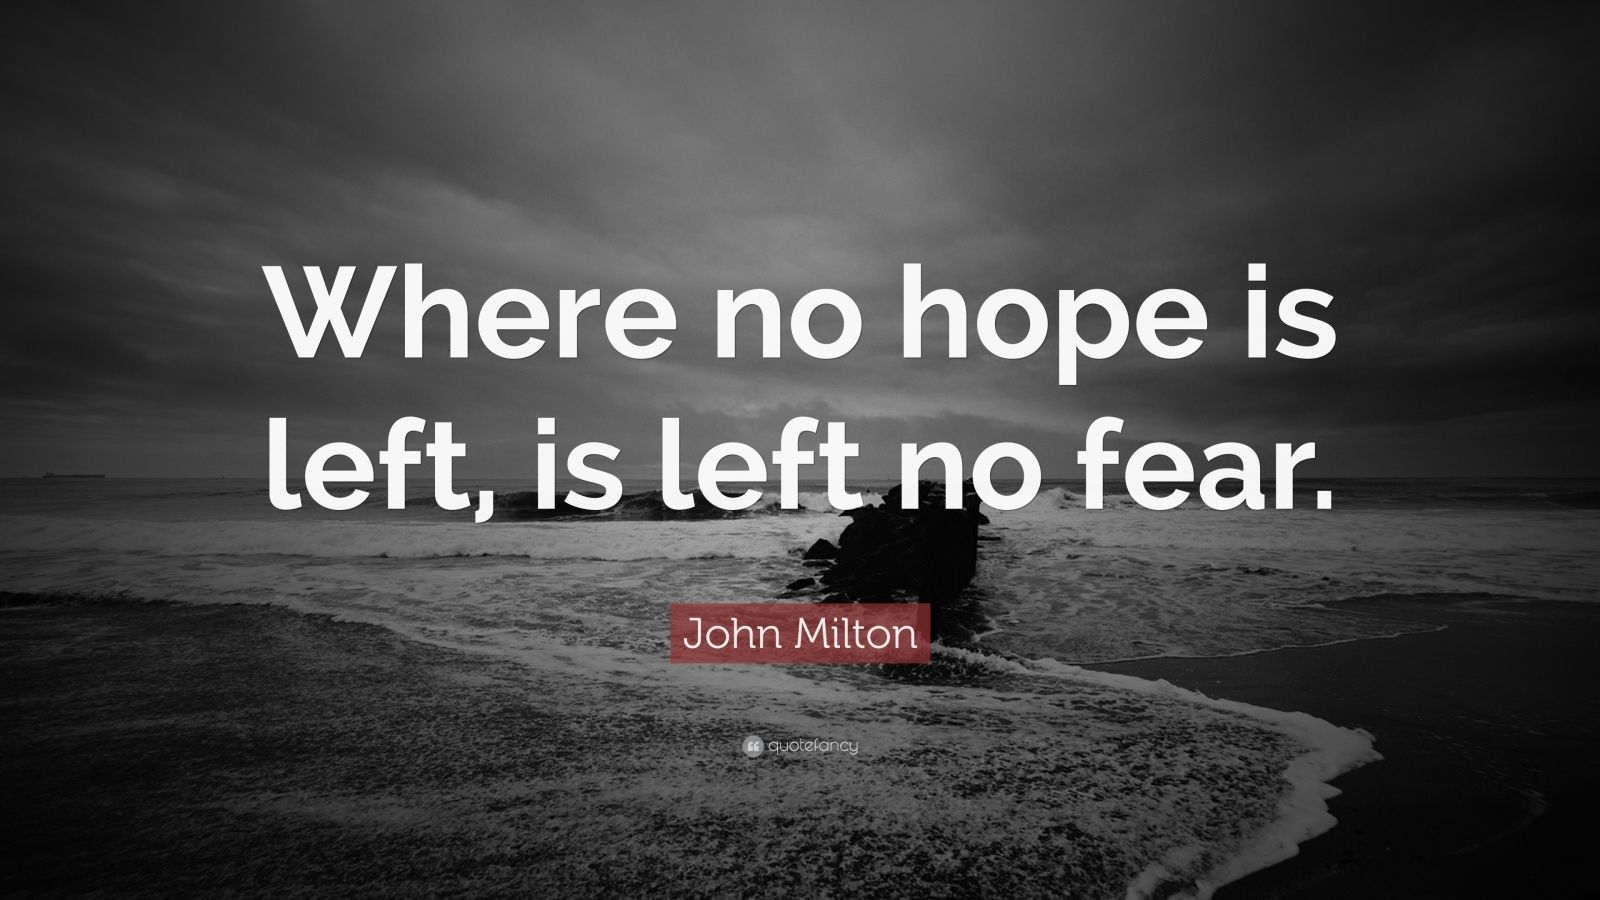 John Milton Quote: “Where no hope is left, is left no fear.”